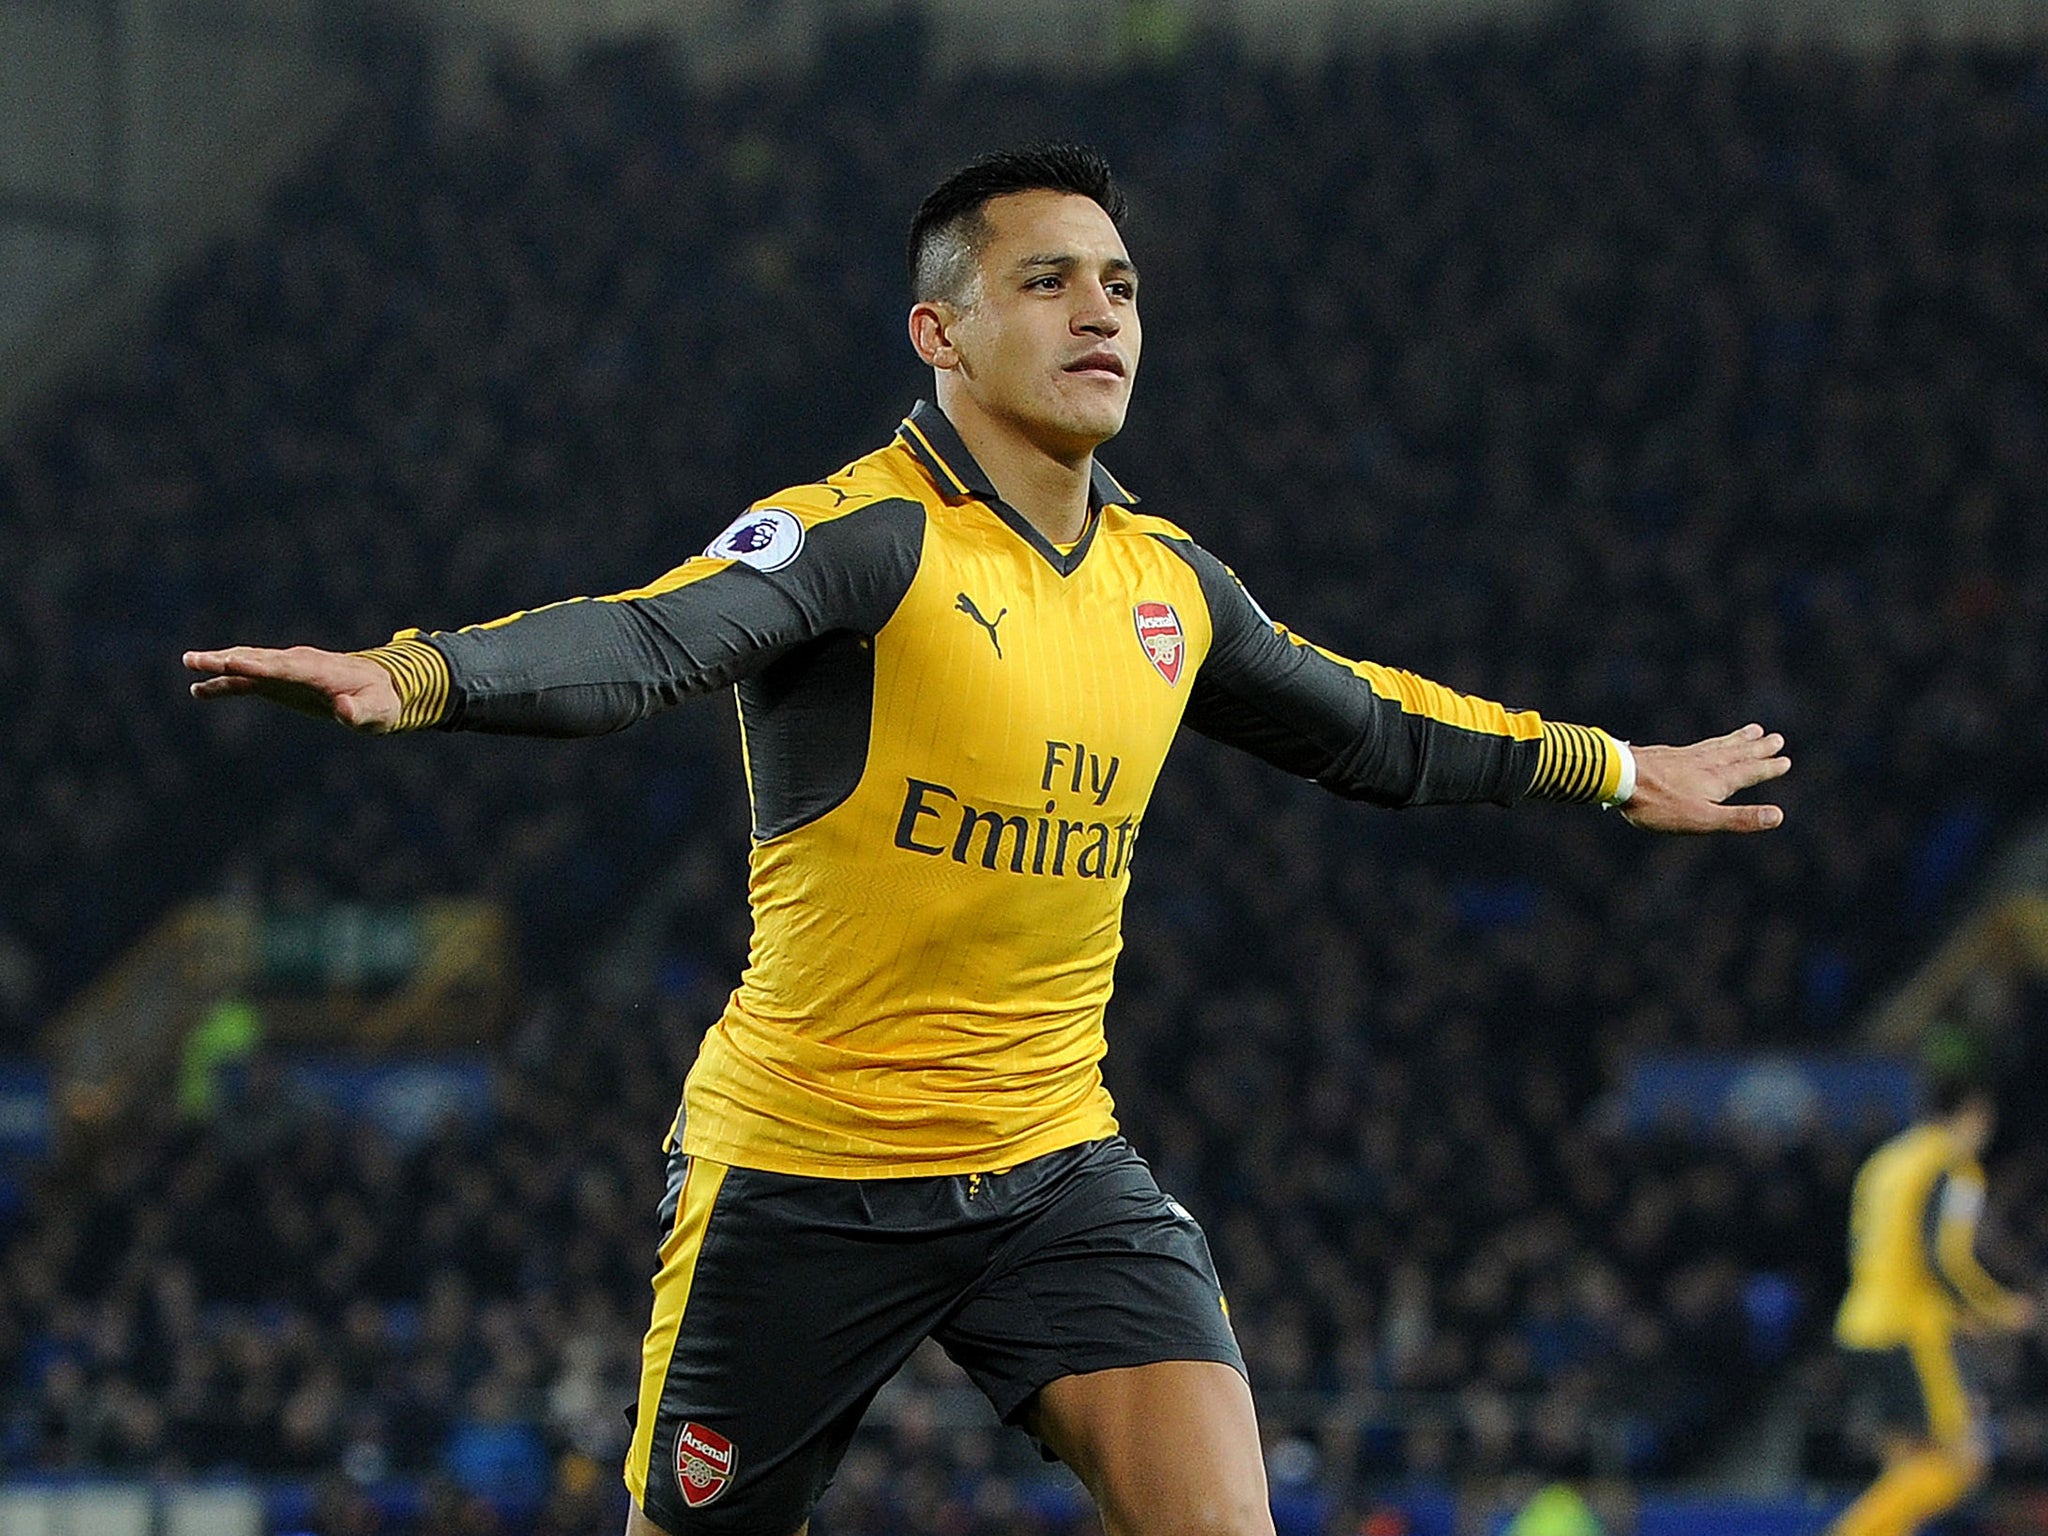 Sanchez has enjoyed a rich vein of form in recent weeks